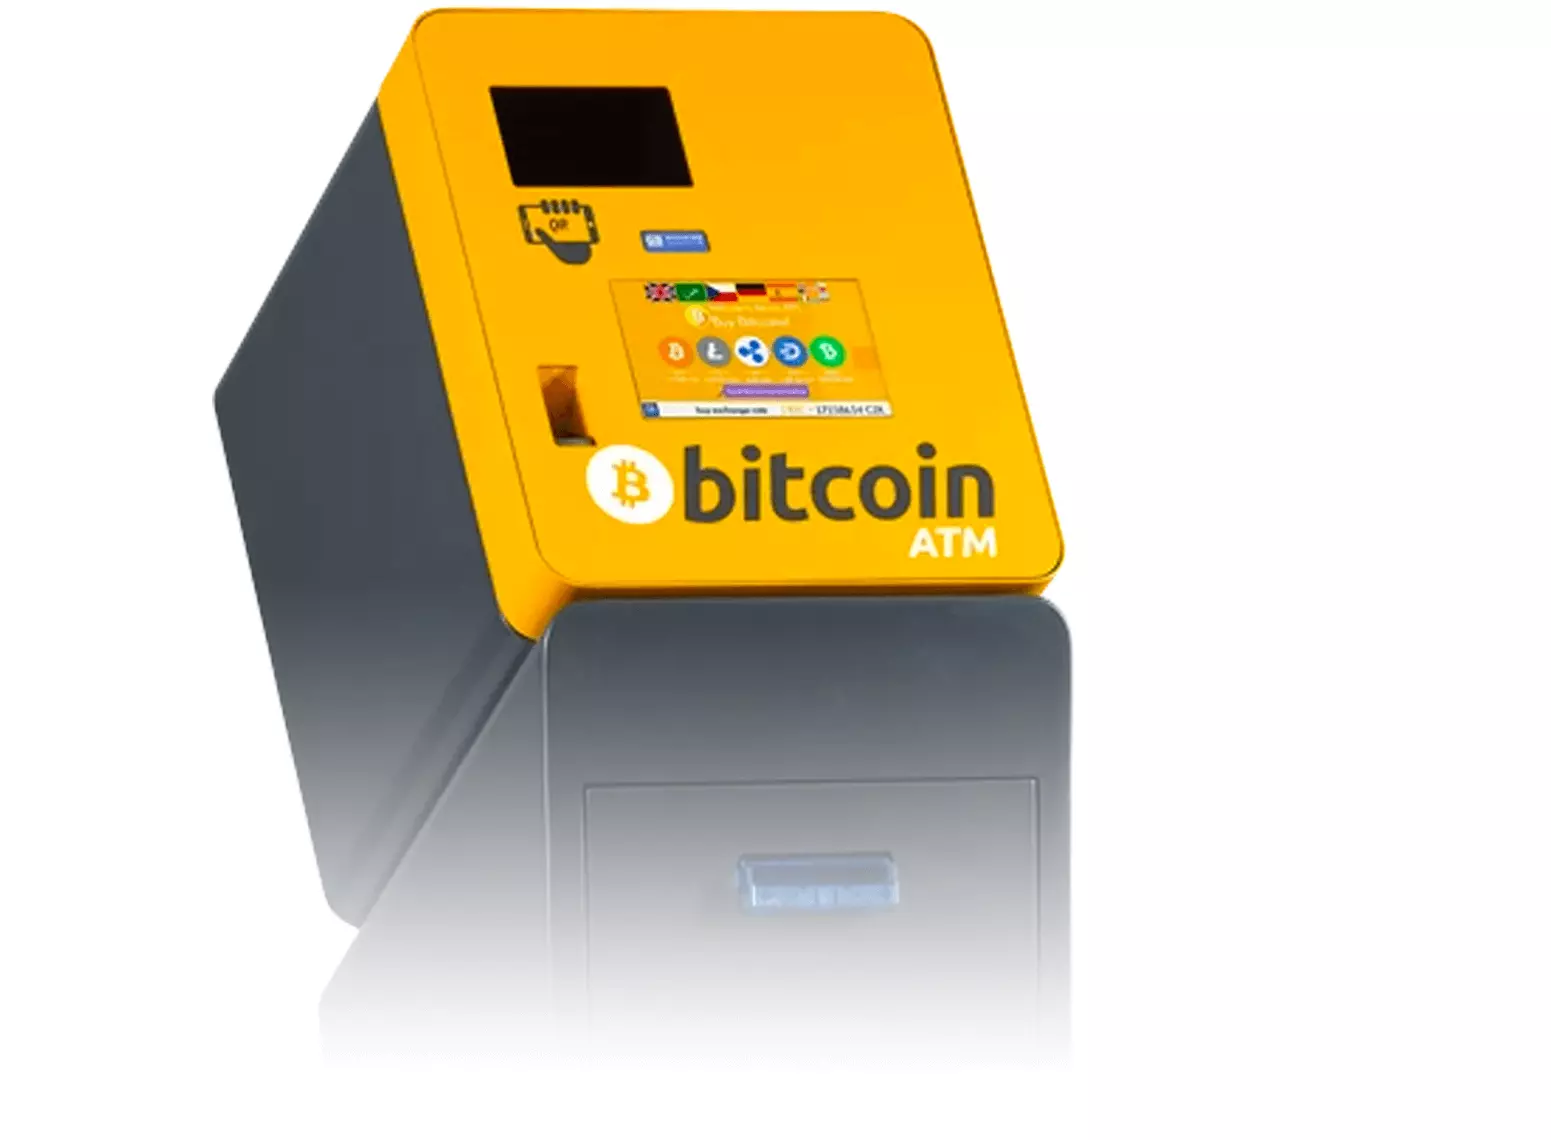 Do Bitcoin ATMs Require Identification?